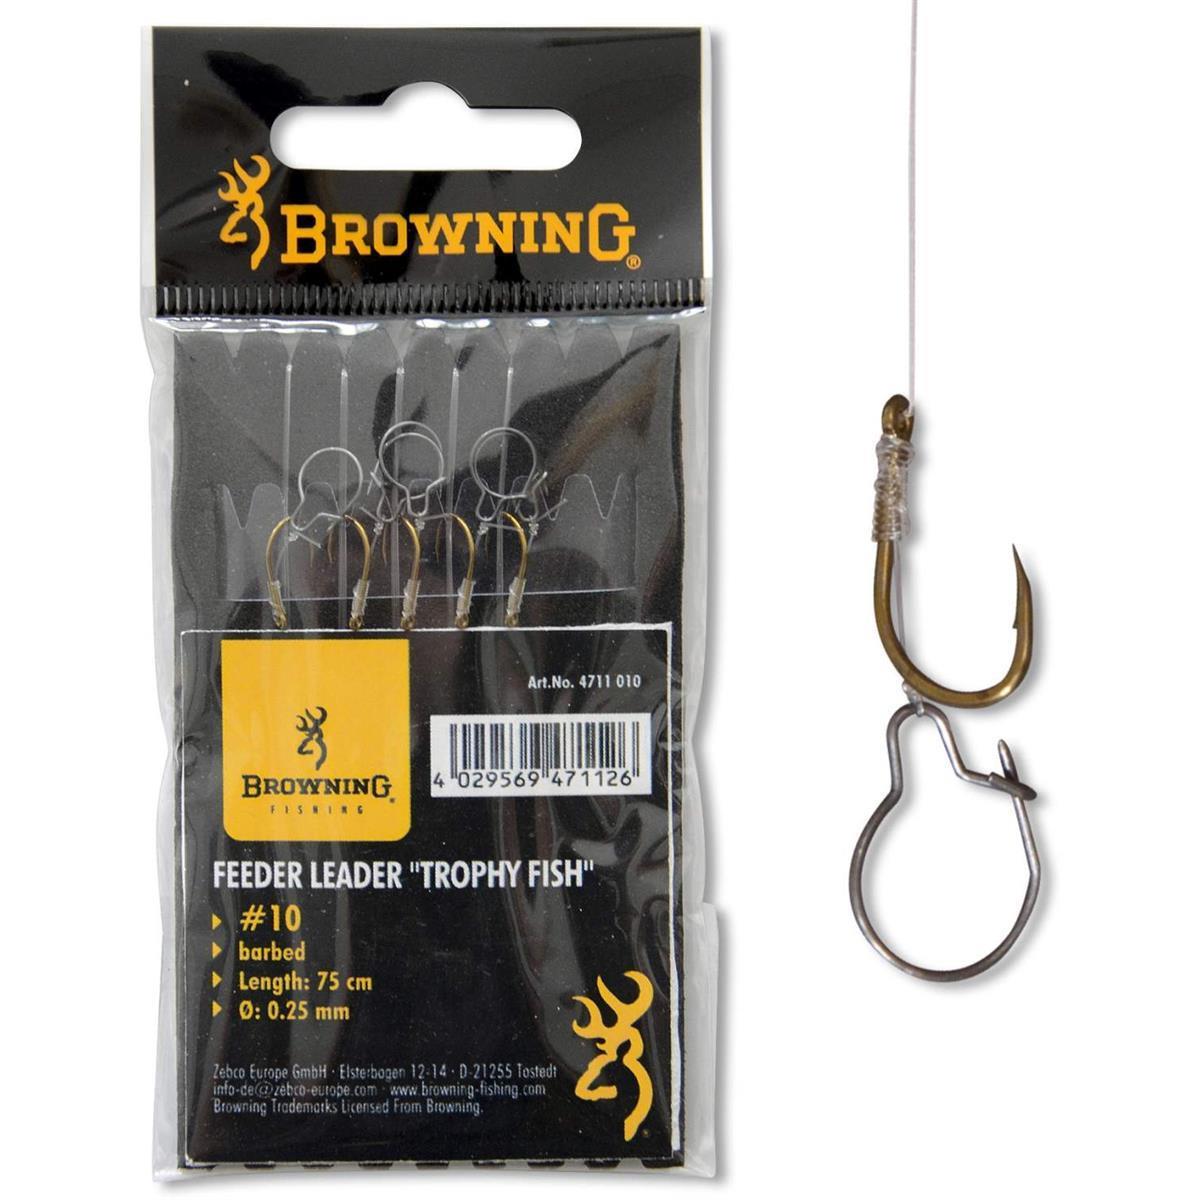 Browning Trophy Fish #14 barbed 0,22 mm 75 cm